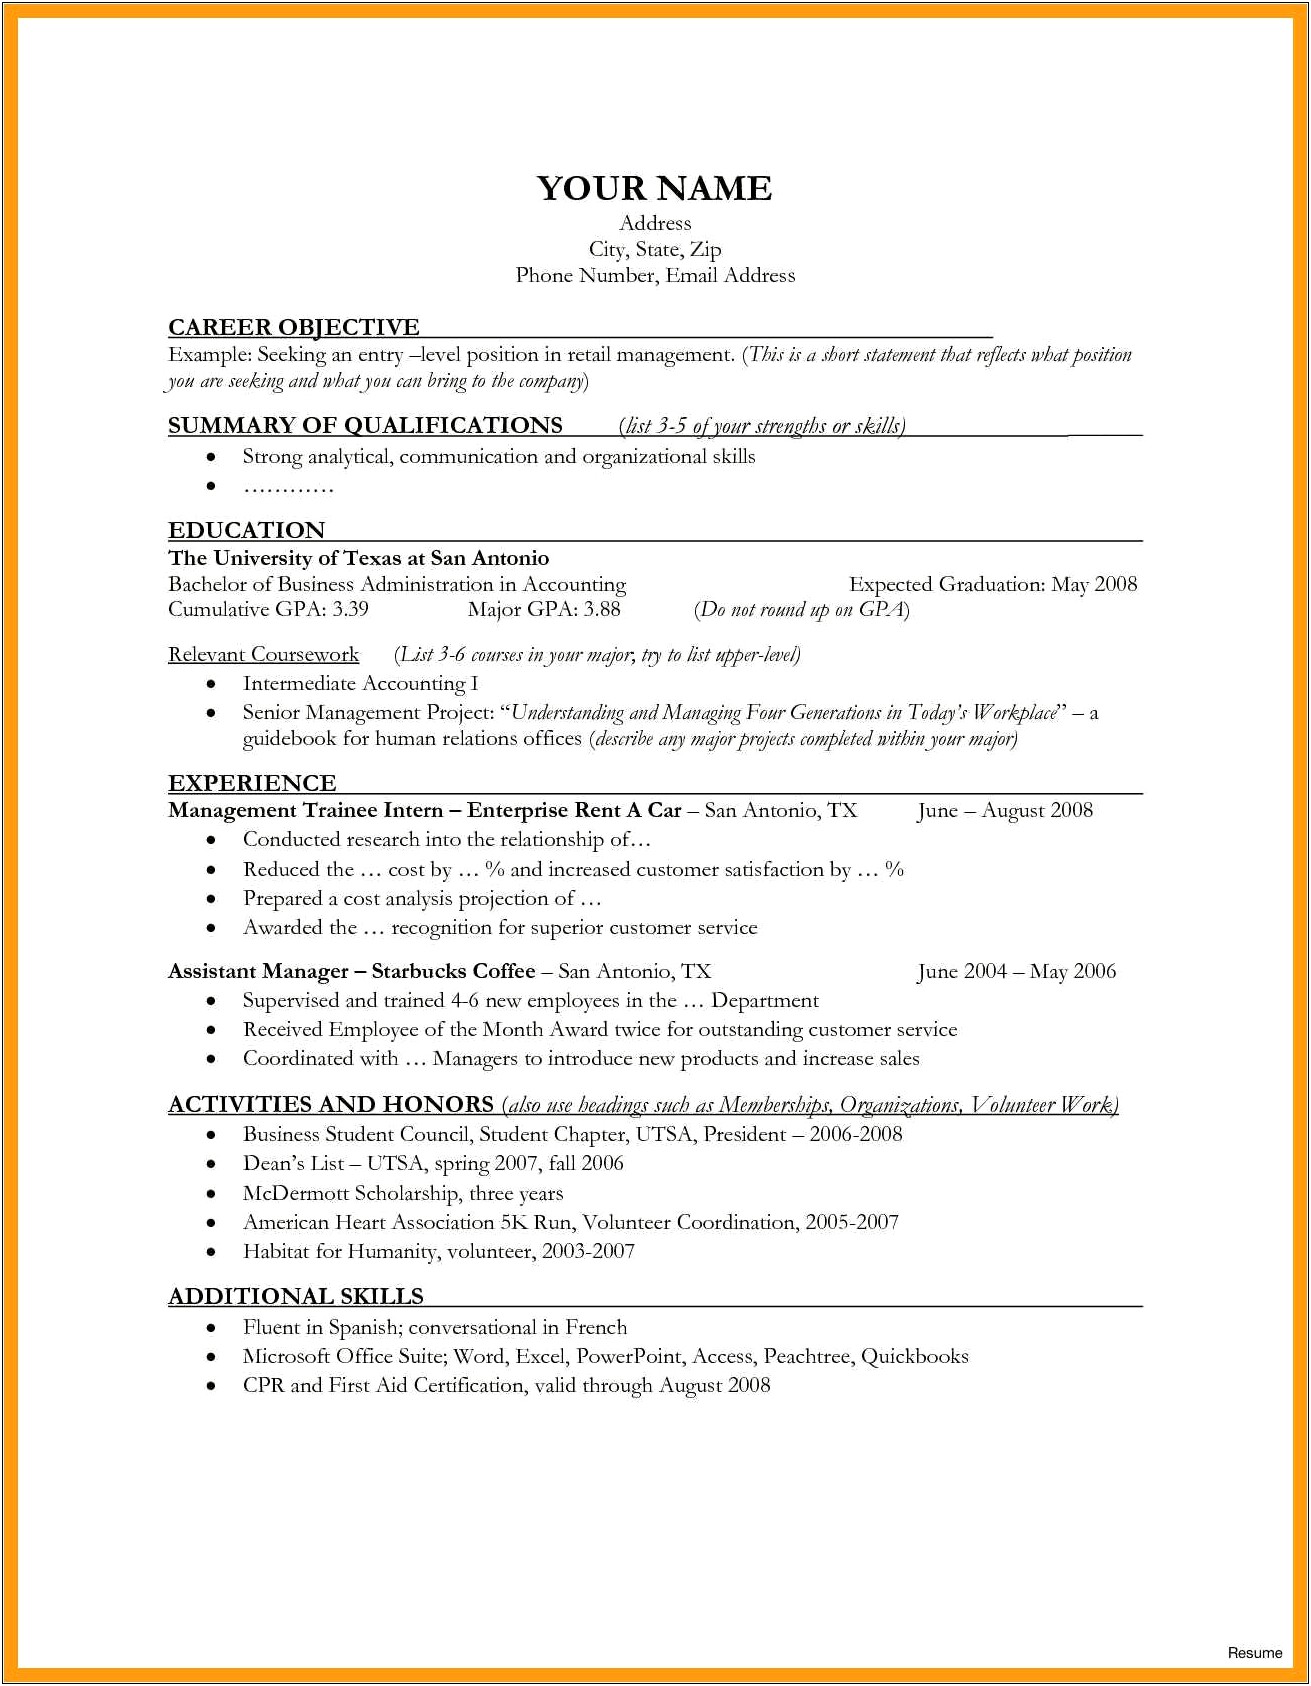 Sample Resume For Management Trainee Position